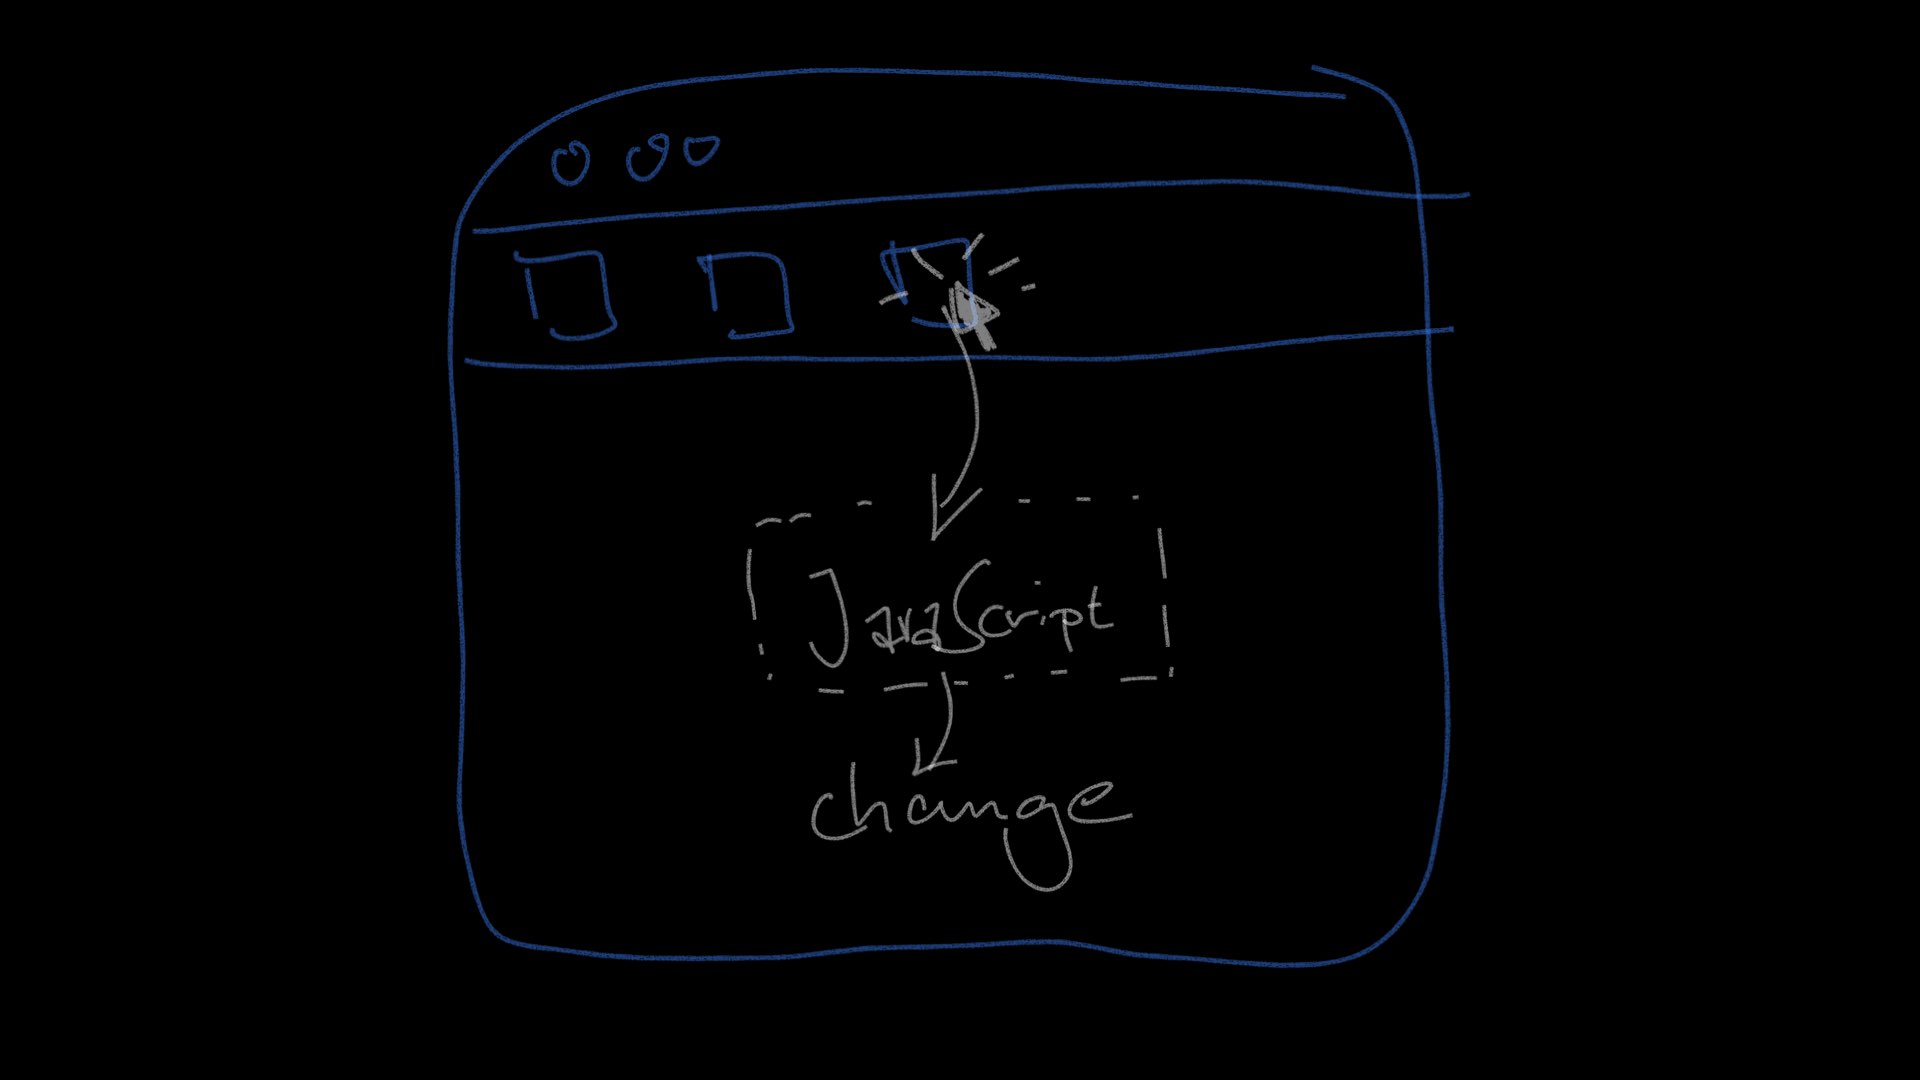 Schematic representation of an app: buttons, clicked on, produce change via JavaScript